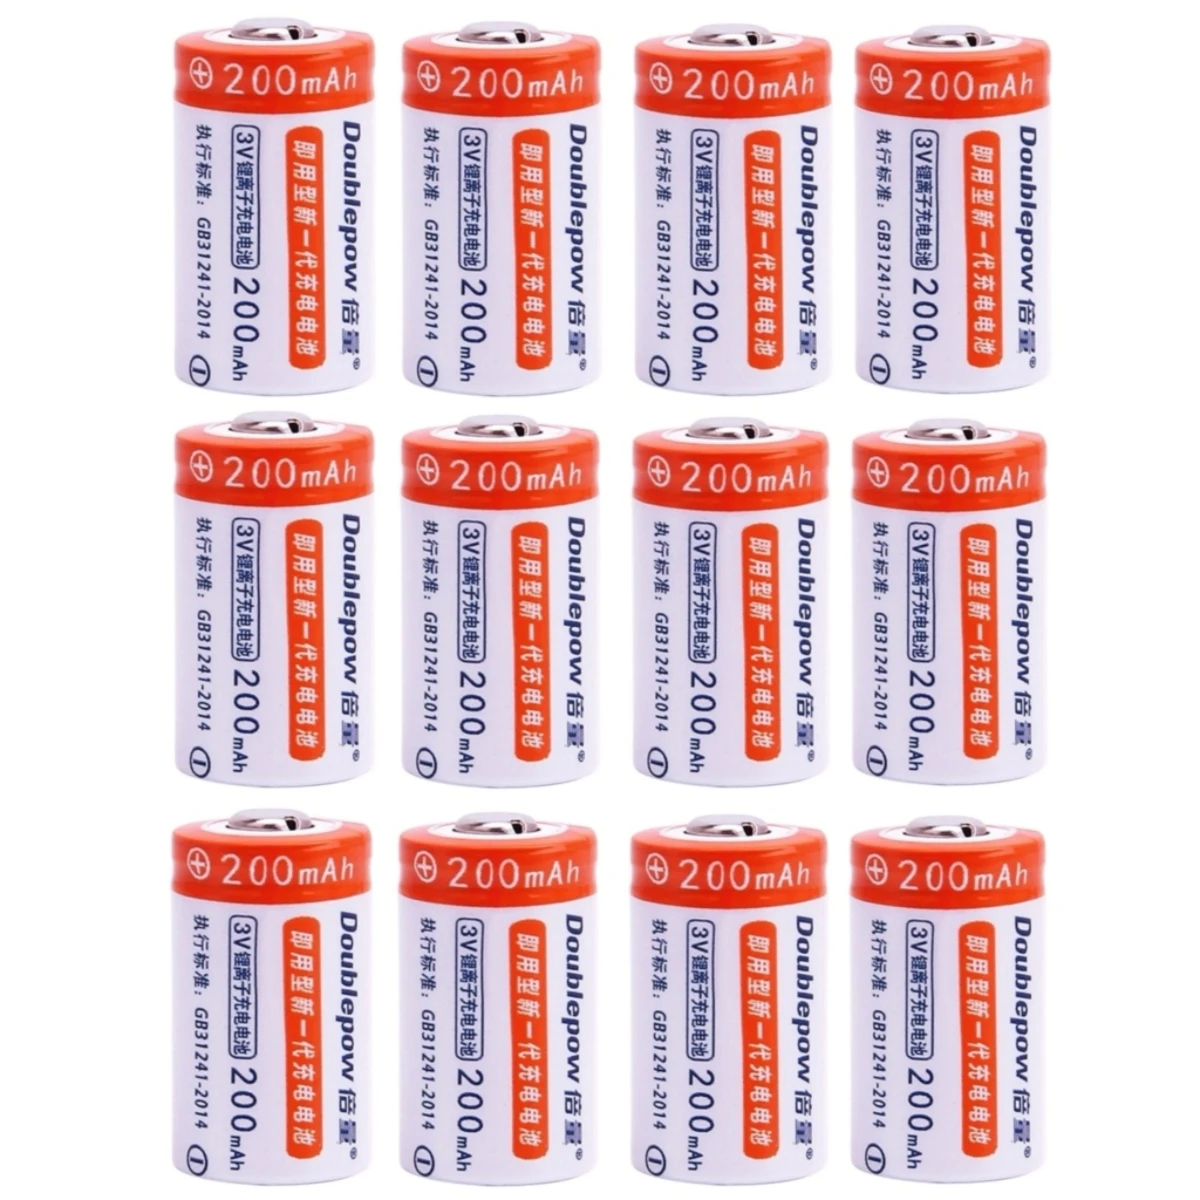 

12pcs/lot High quality 3V Cr2 rechargeable battery 200mAh lithium ion rechargeable battery suitable for camera lithium battery